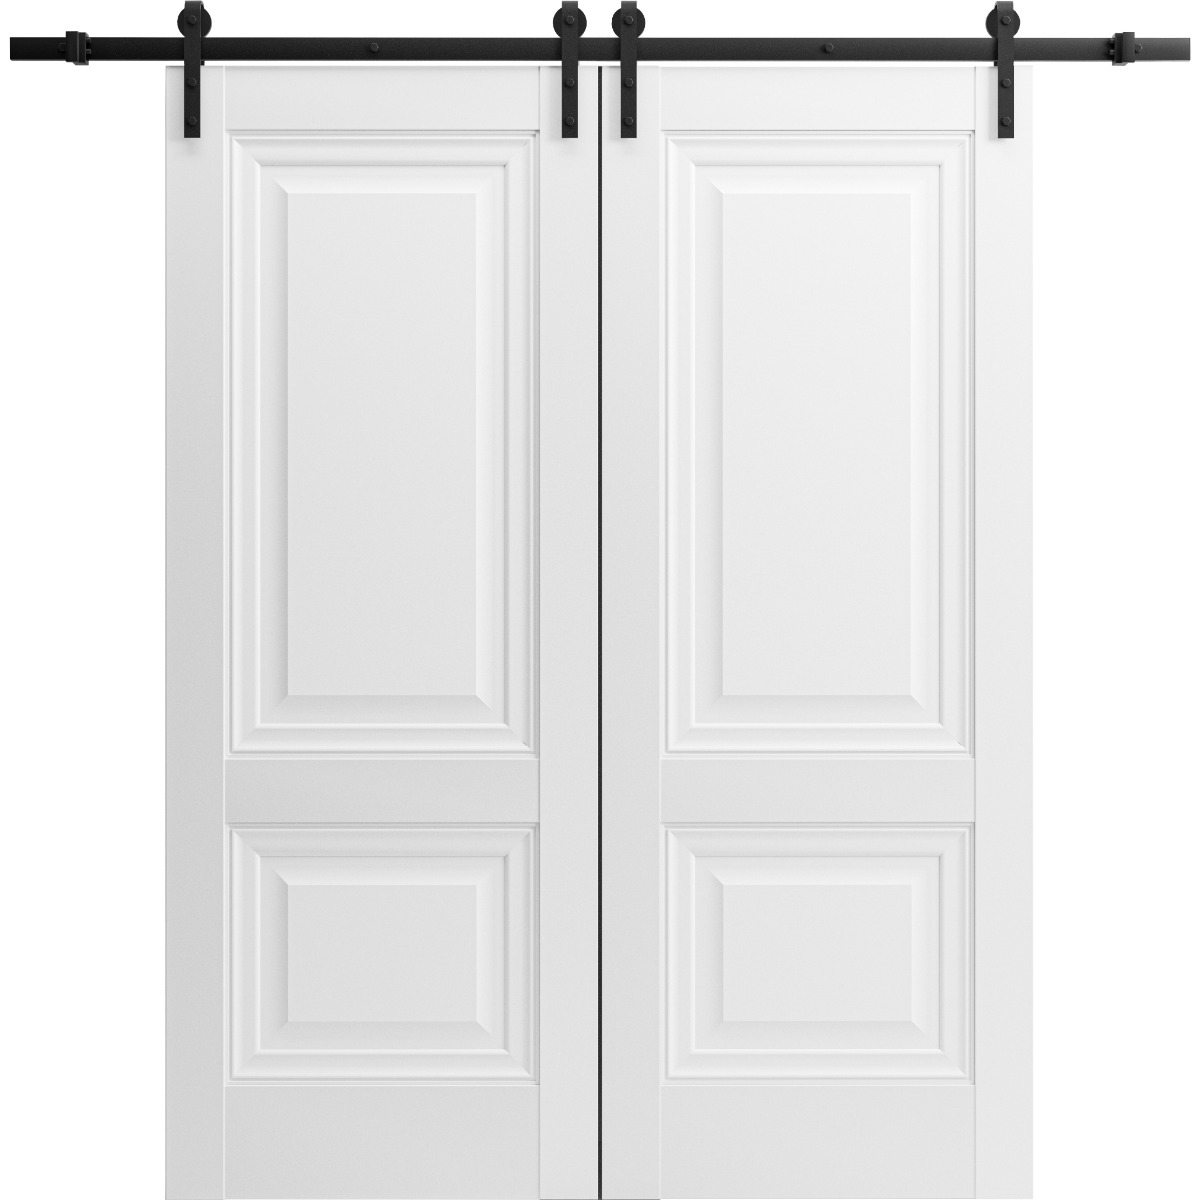 Sturdy Double Barn Door with | Lucia 8831 White Silk | 13FT Rail Hangers Heavy Set | Solid Panel Int